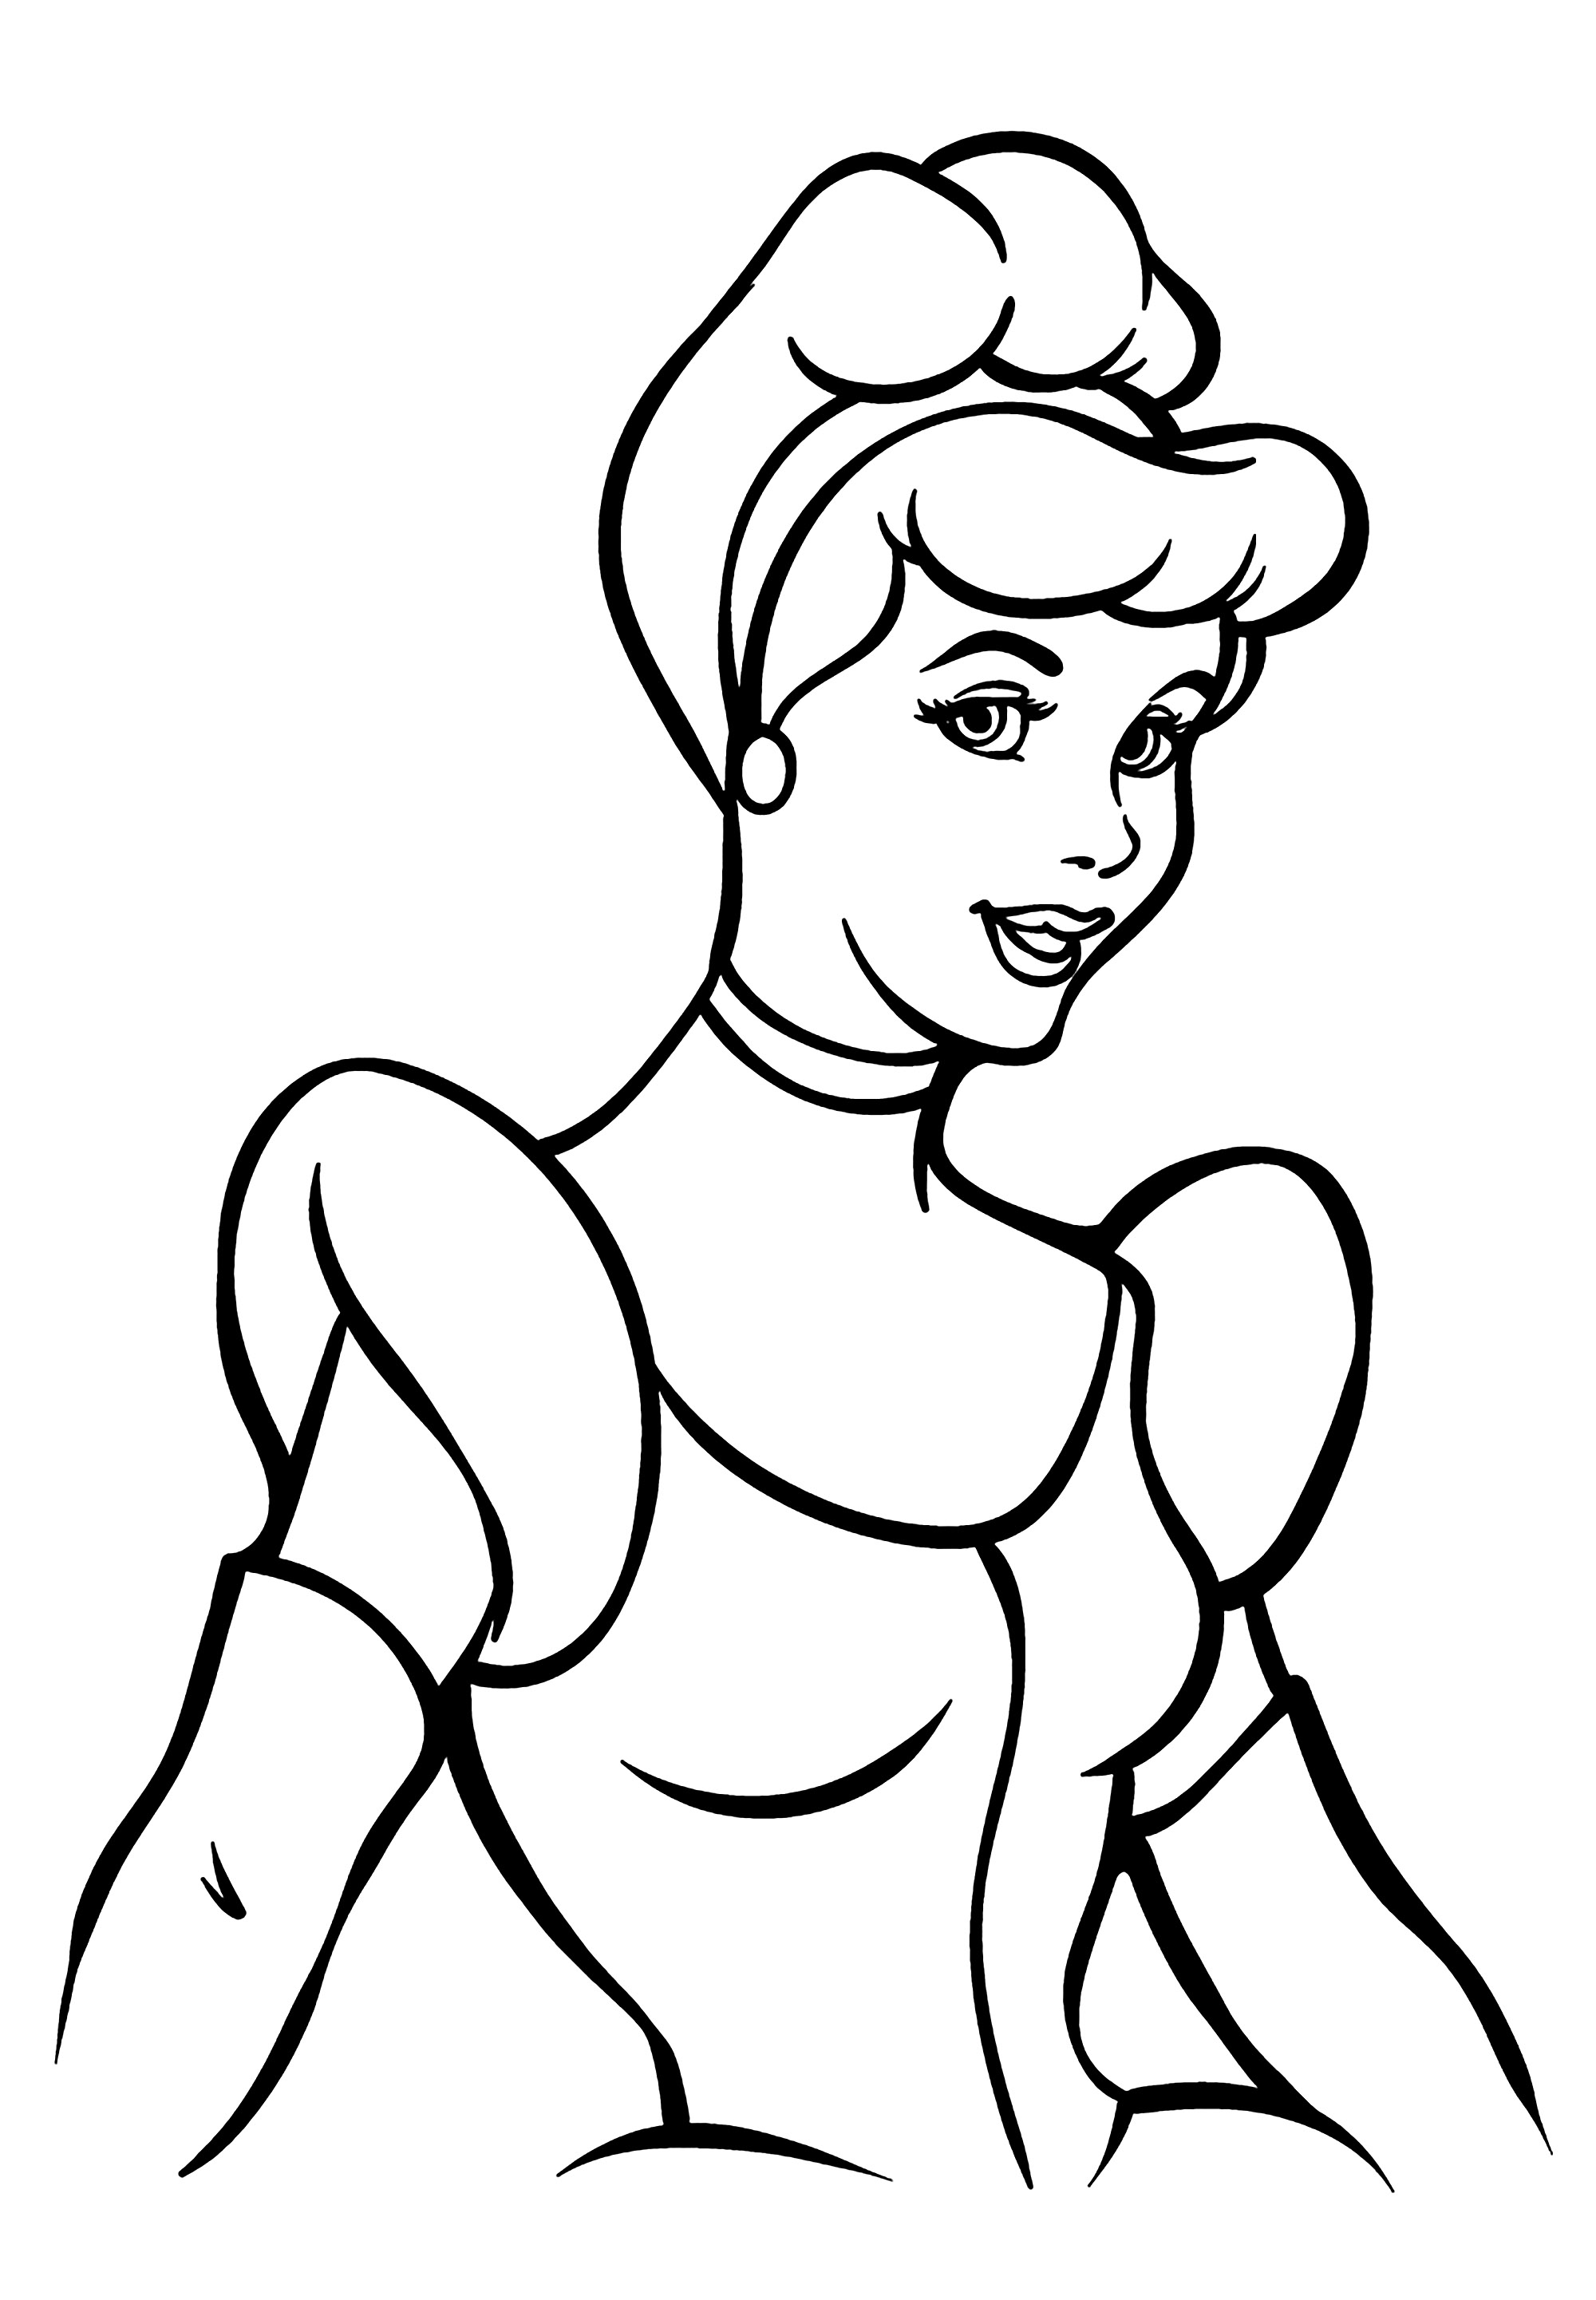 Cinderella in a coloring book for the little ones - Cinderella Kids ...